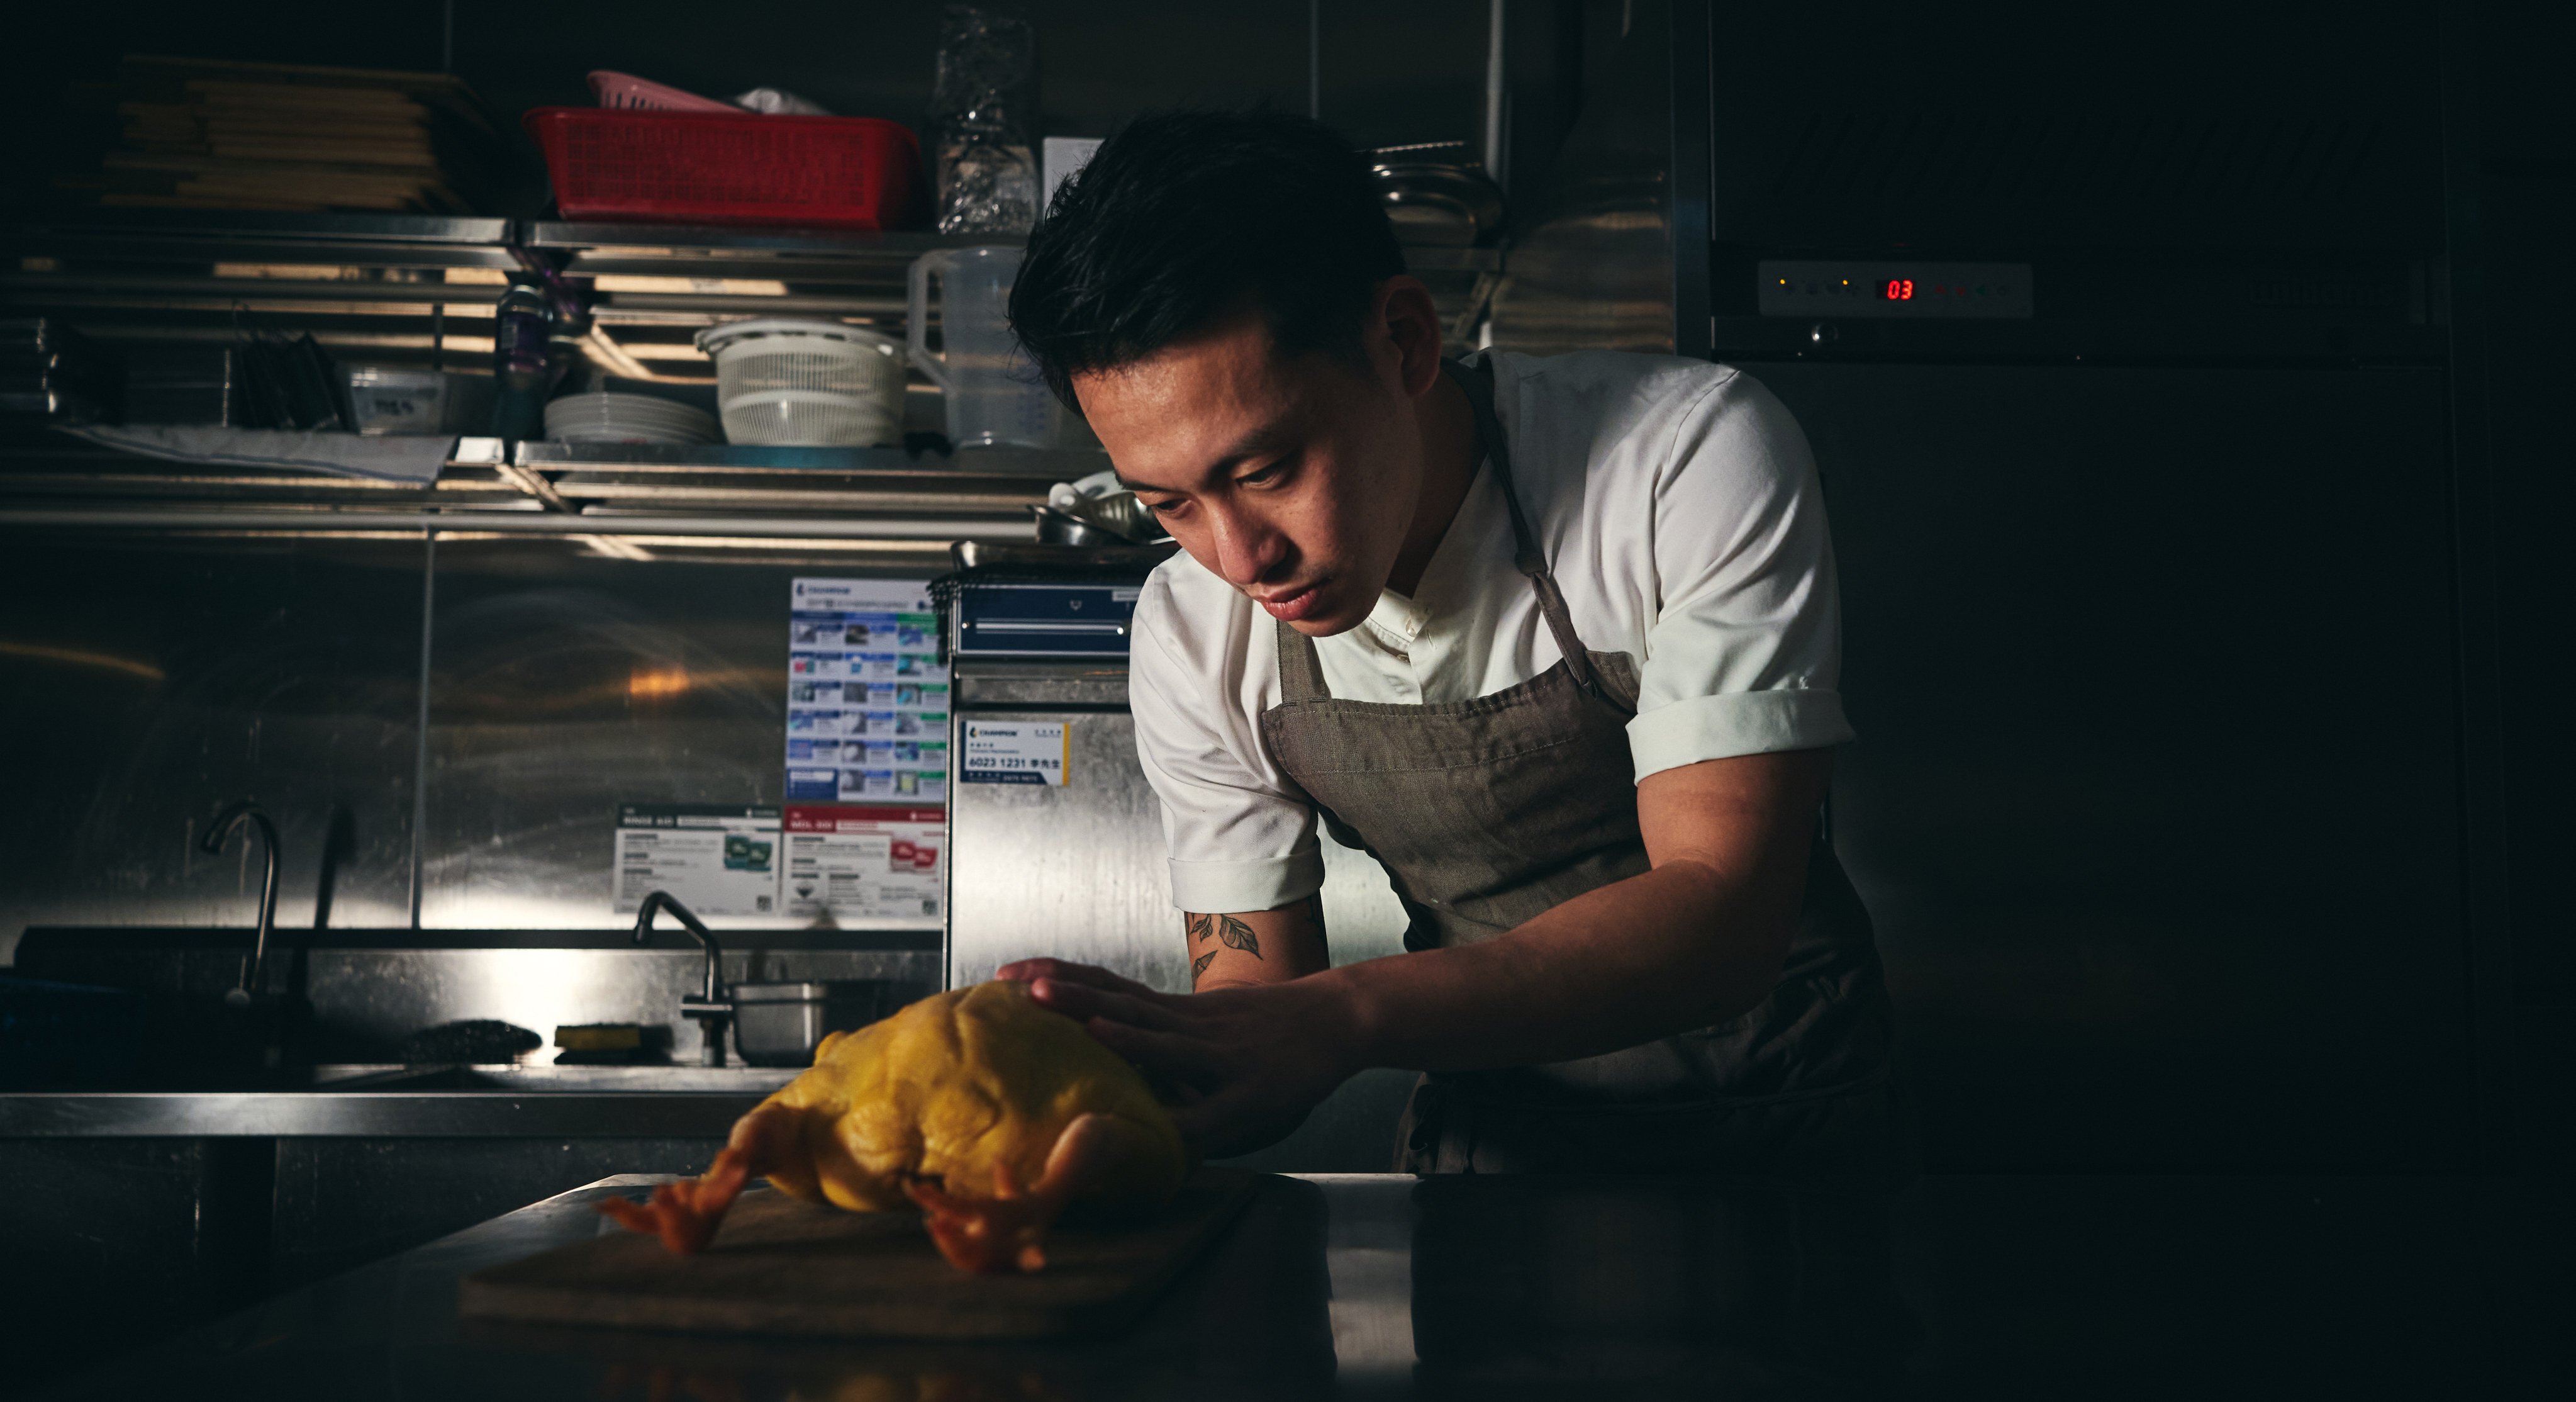 For chef Aven Lau of Bâtard, going on the hunt with friends at weekends for Singapore’s best chicken rice, laksa or yong tau foo is one of the things he misses the most.